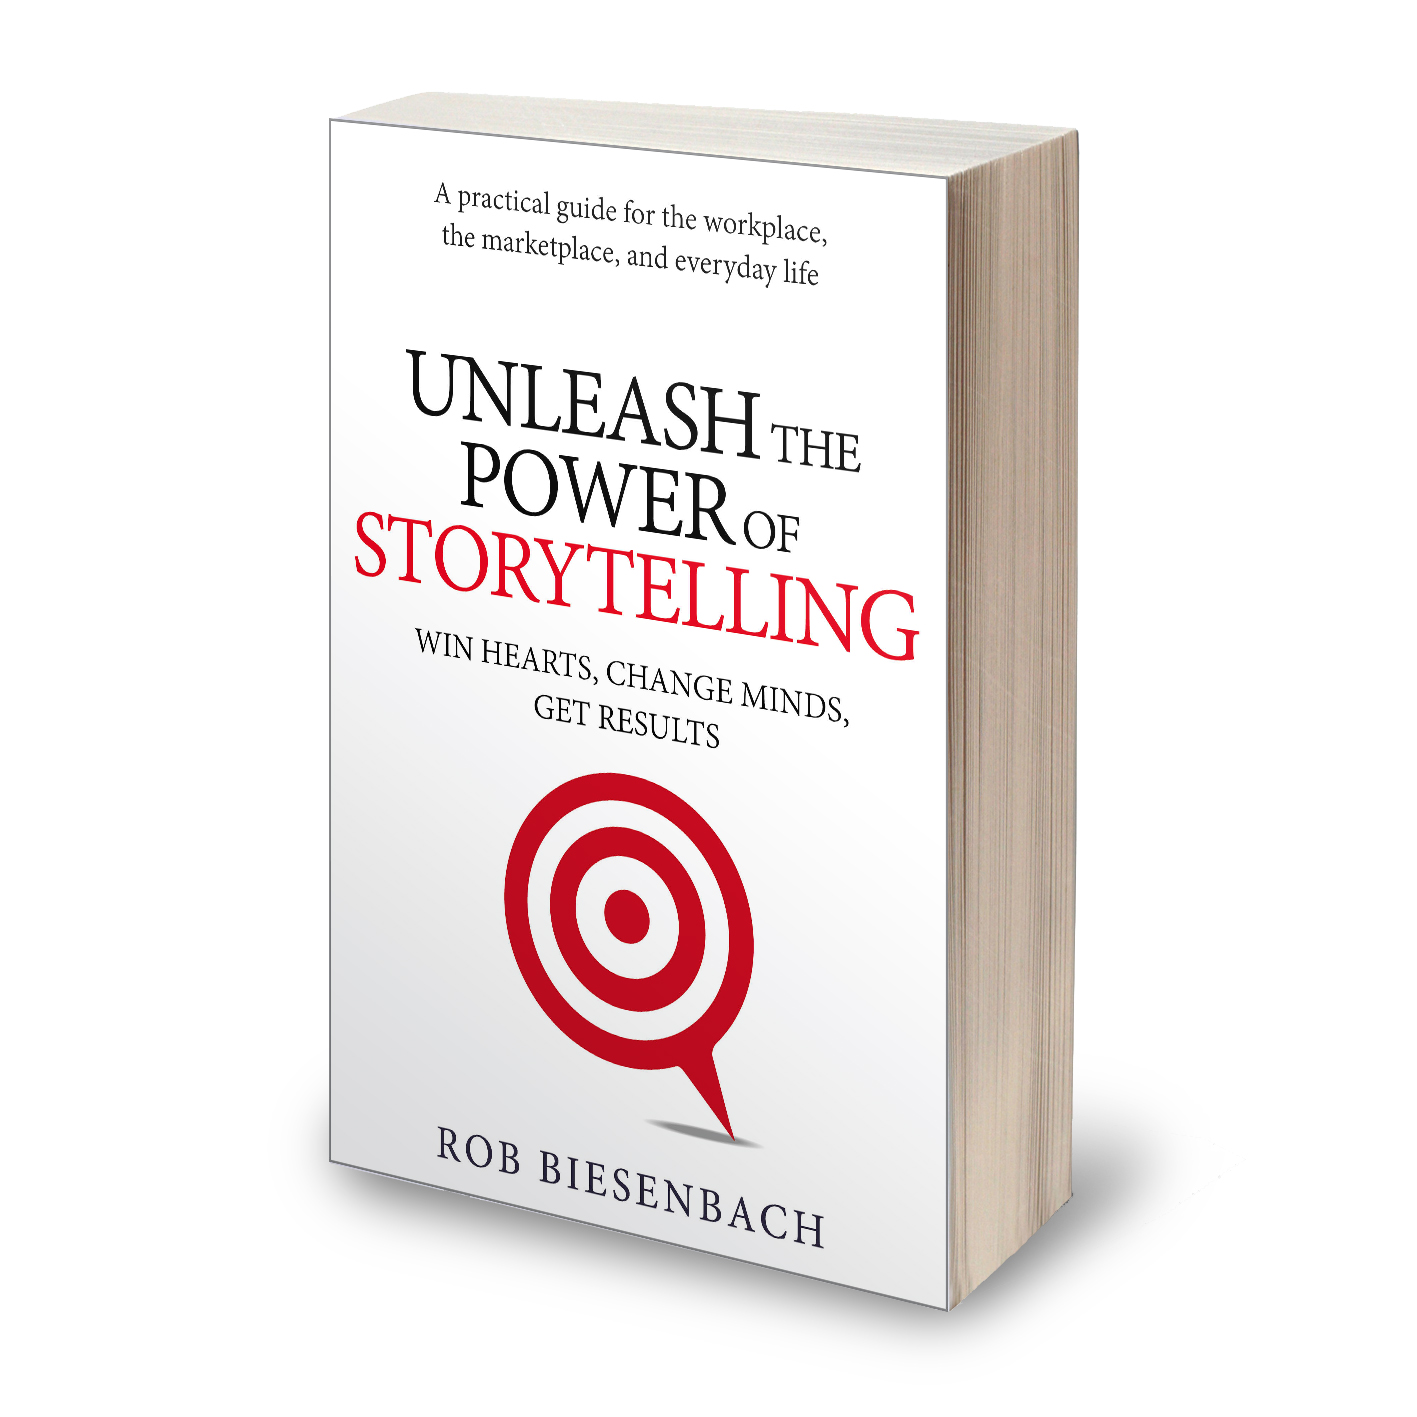 Now on Sale: Unleash the Power of Storytelling